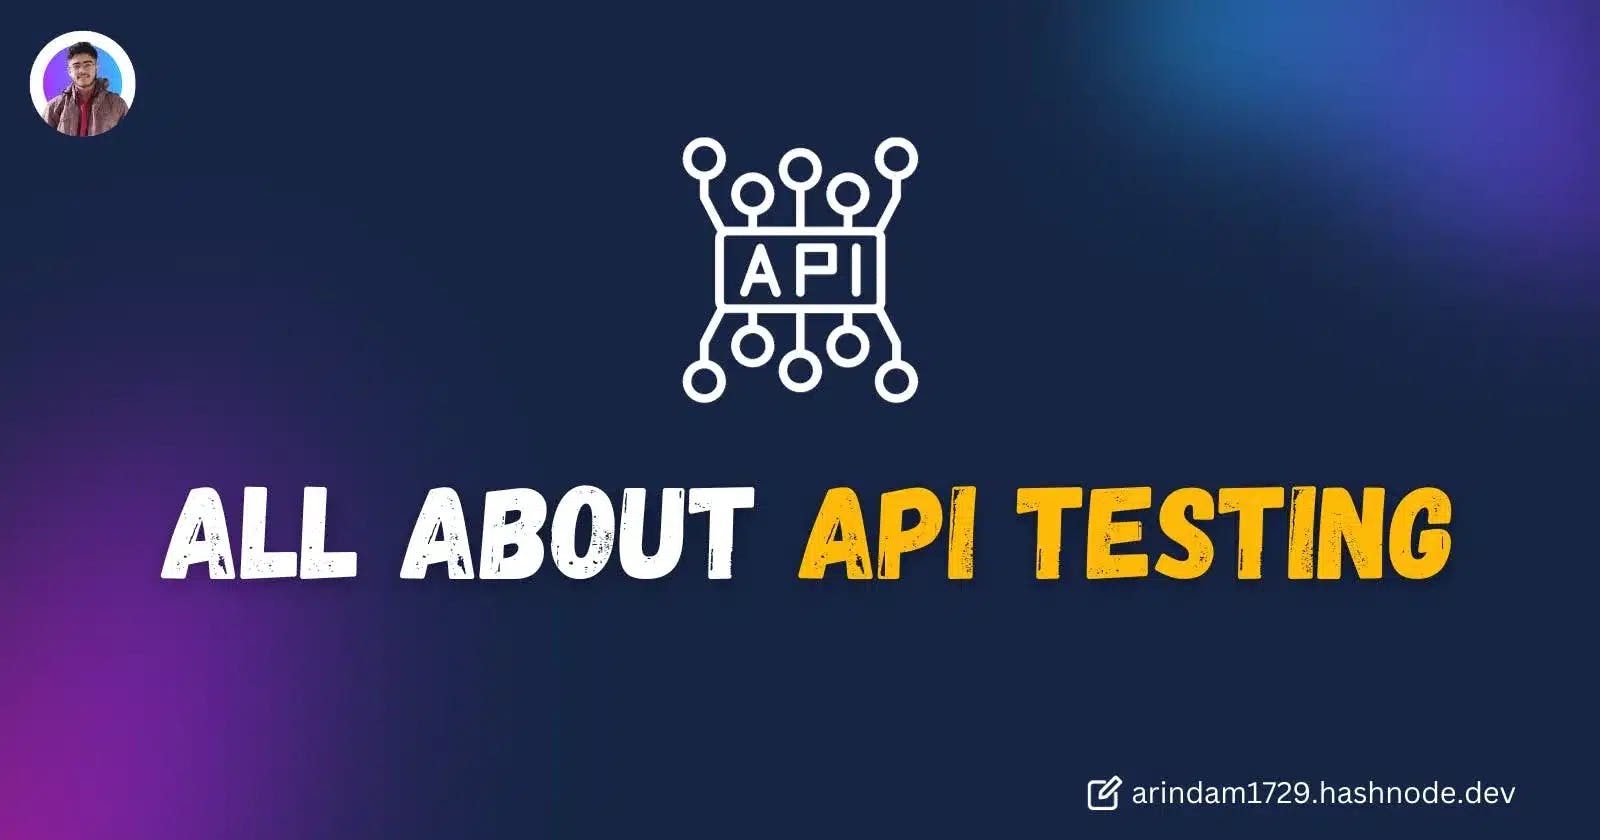 Cover Image for All about API testing & Keploy